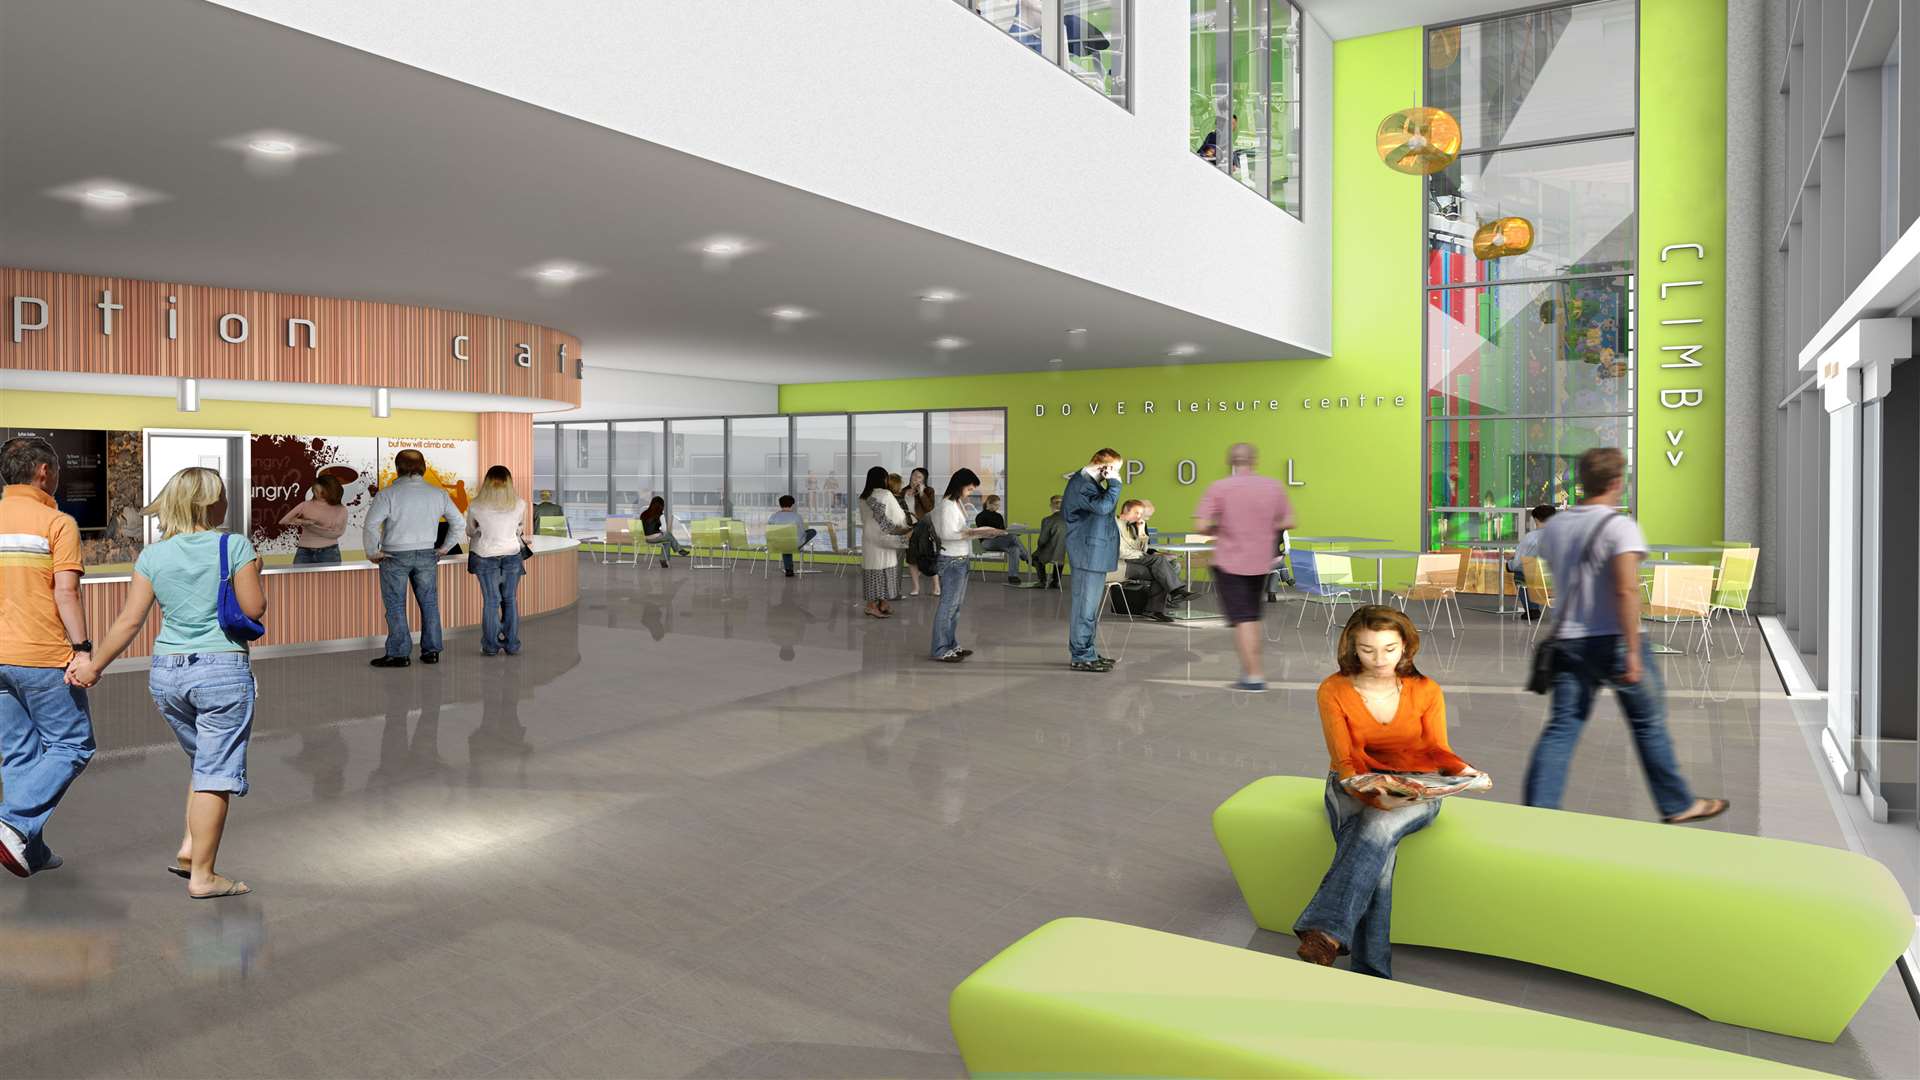 New image of the reception for the future Dover leisure centre.